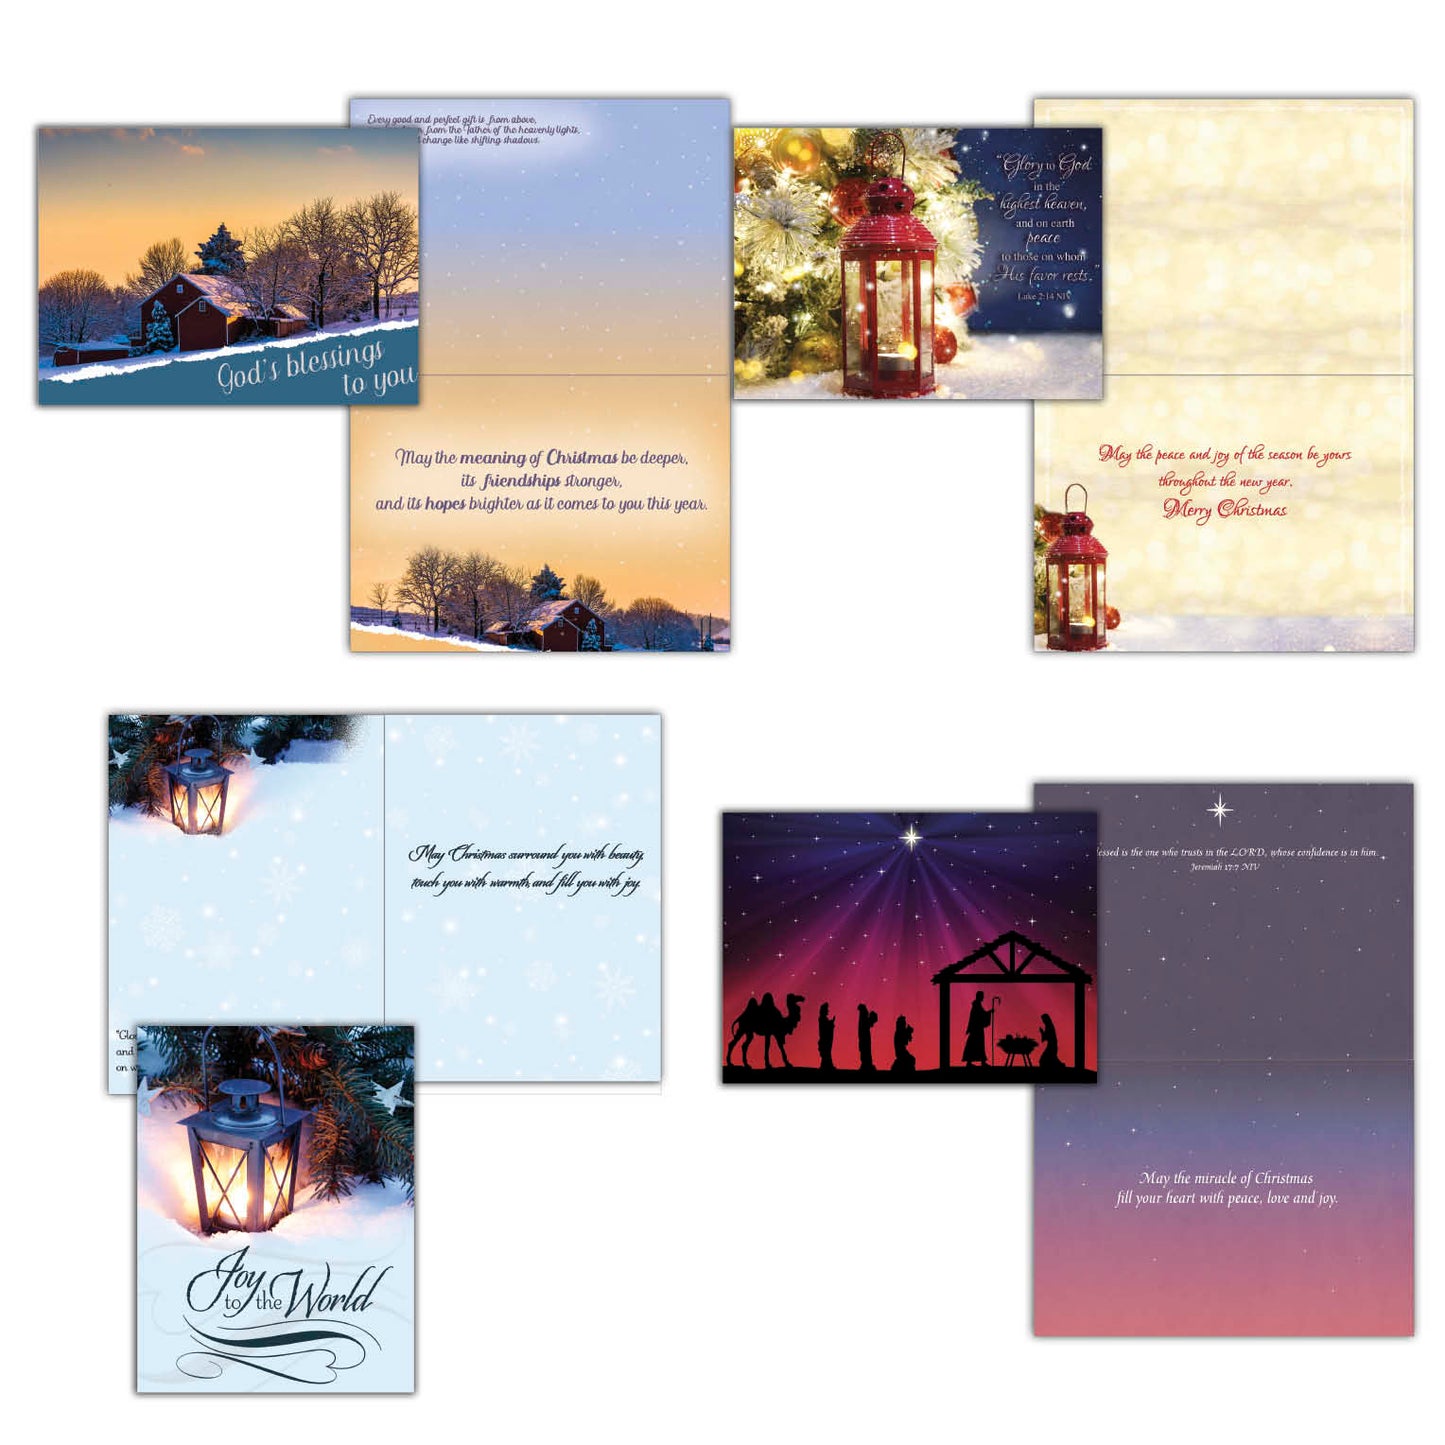 Extra Large Boxed Christmas Card Assortment - Wonderful Time of the Year - NIV- 48 Cards and Envelopes